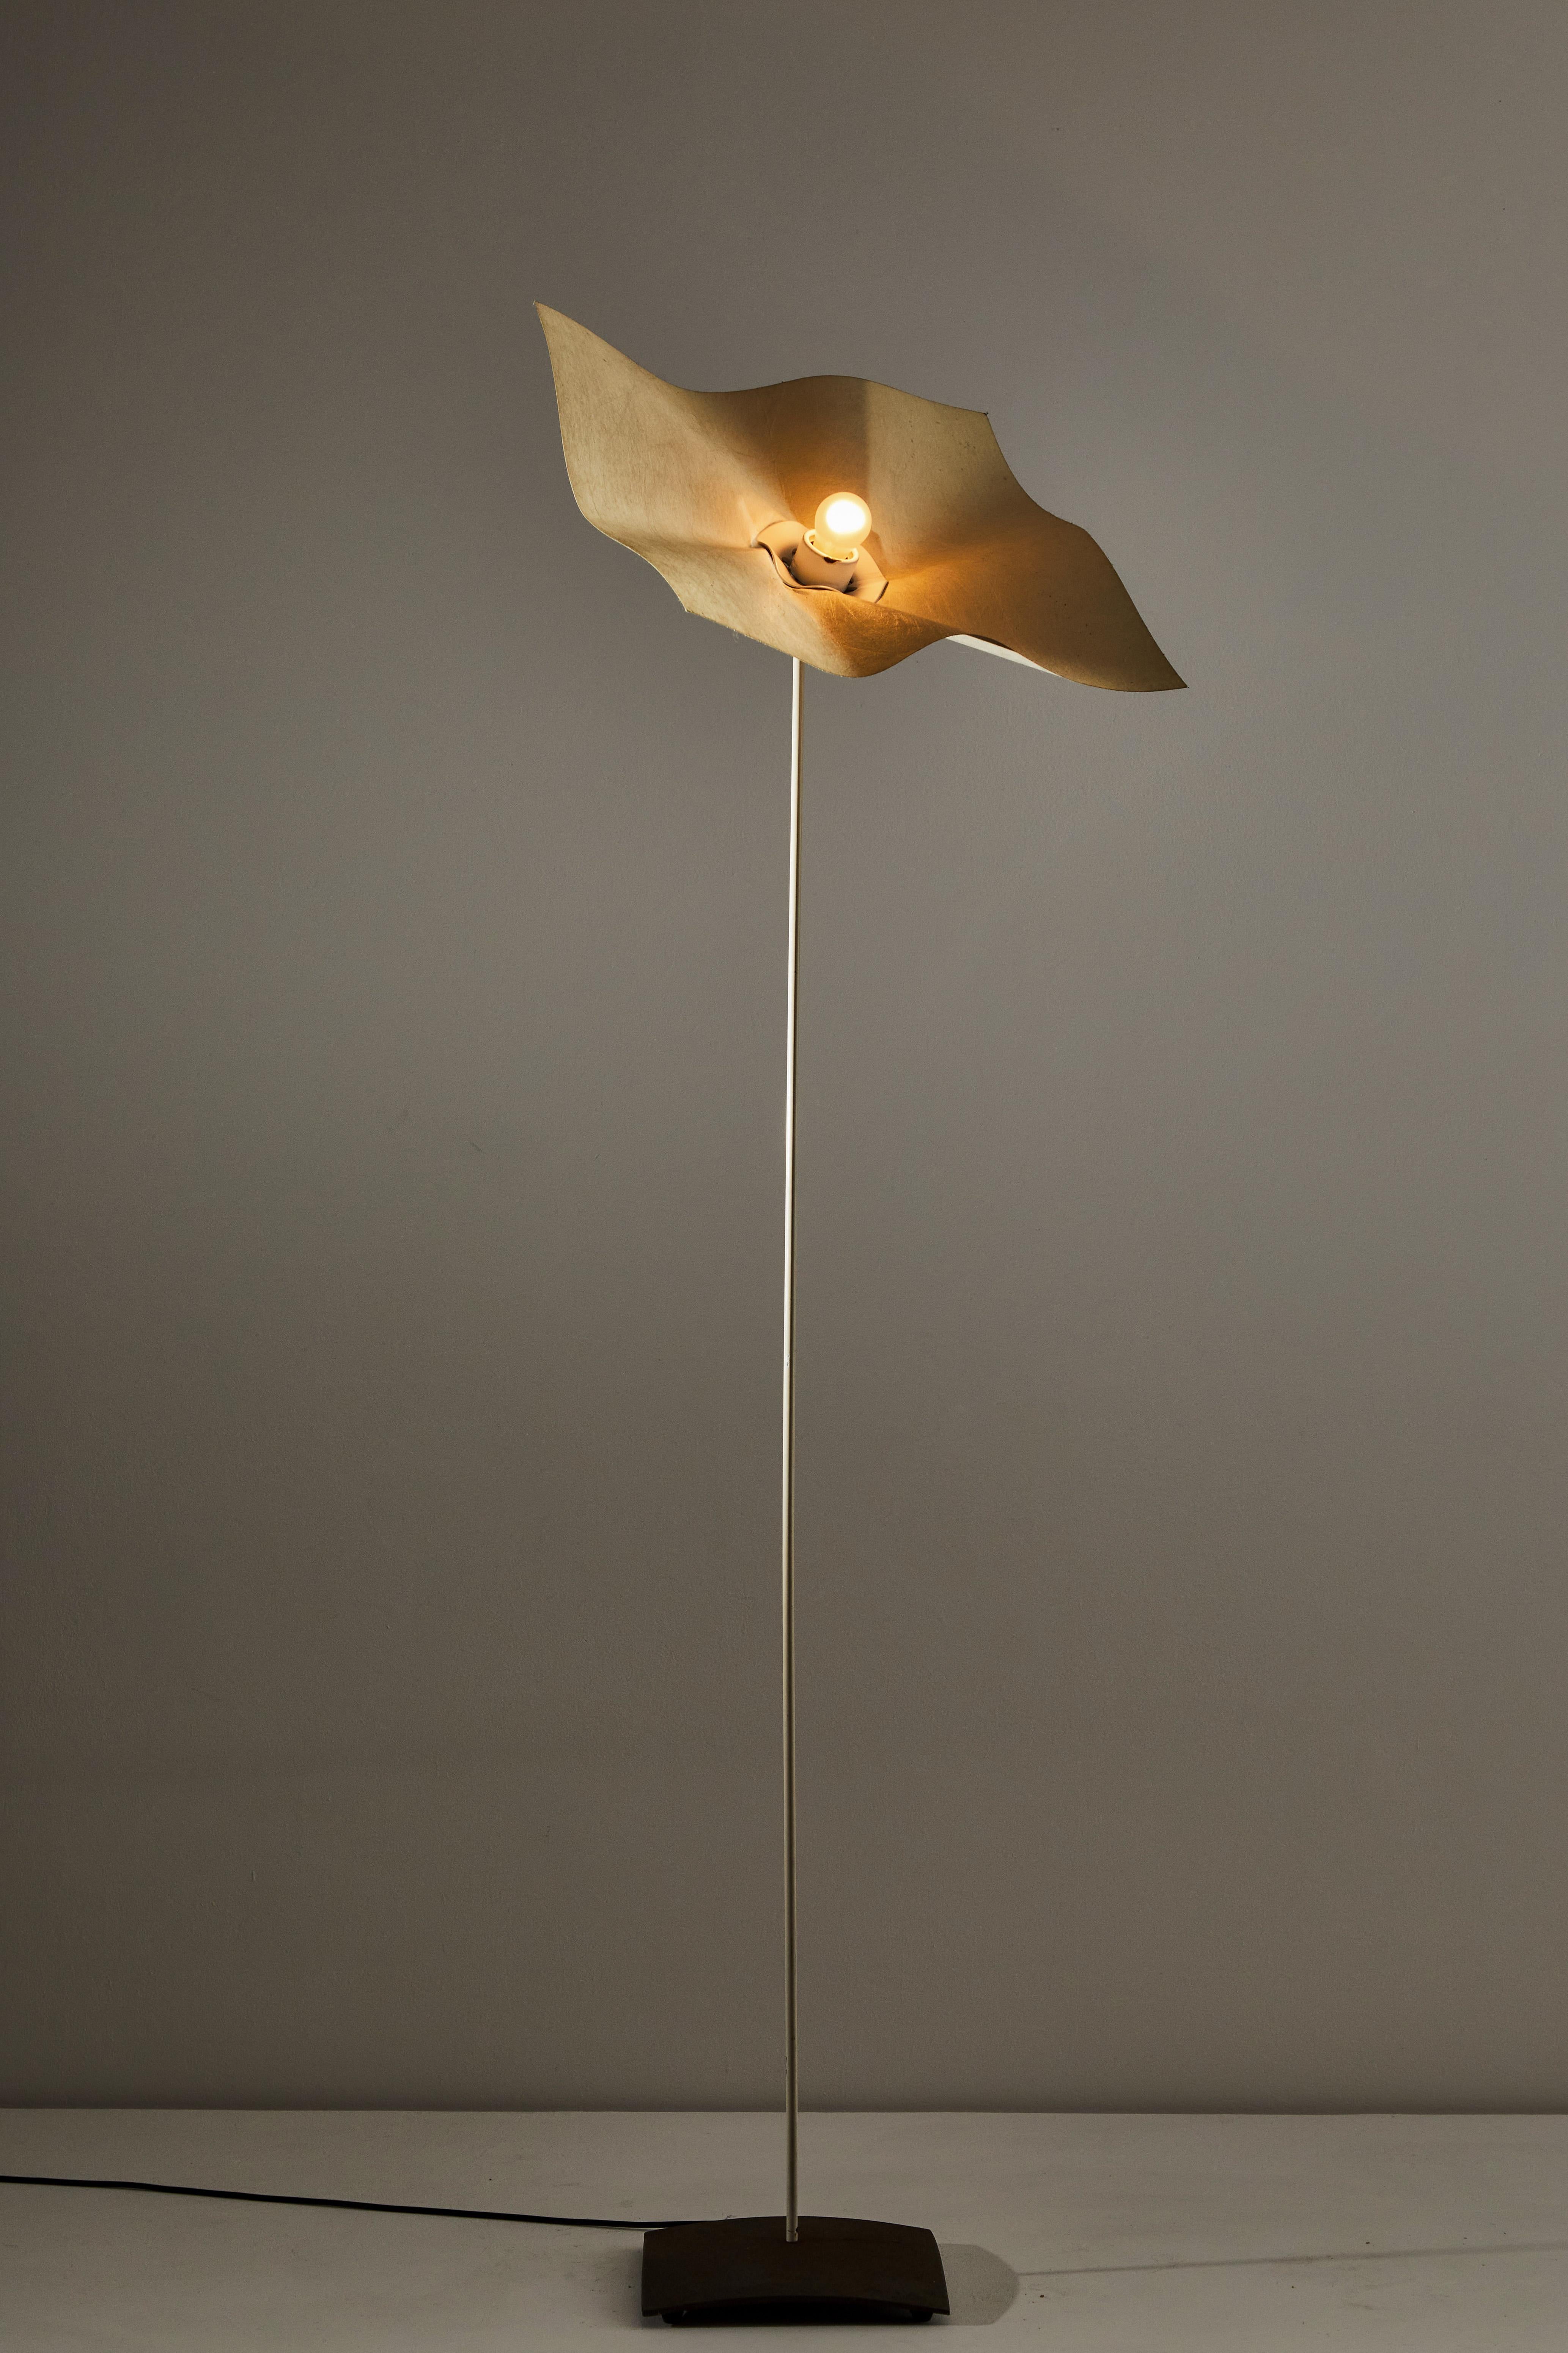 Area curvea floor lamp by Mario Bellini & Giorgio Origlia for Artemide. Designed and manufactured in Italy, 1974. Felt diffuser, metal base. Original cord with step switch. Takes one E27 40w maximum bulb. Bulbs provided as a onetime courtesy.